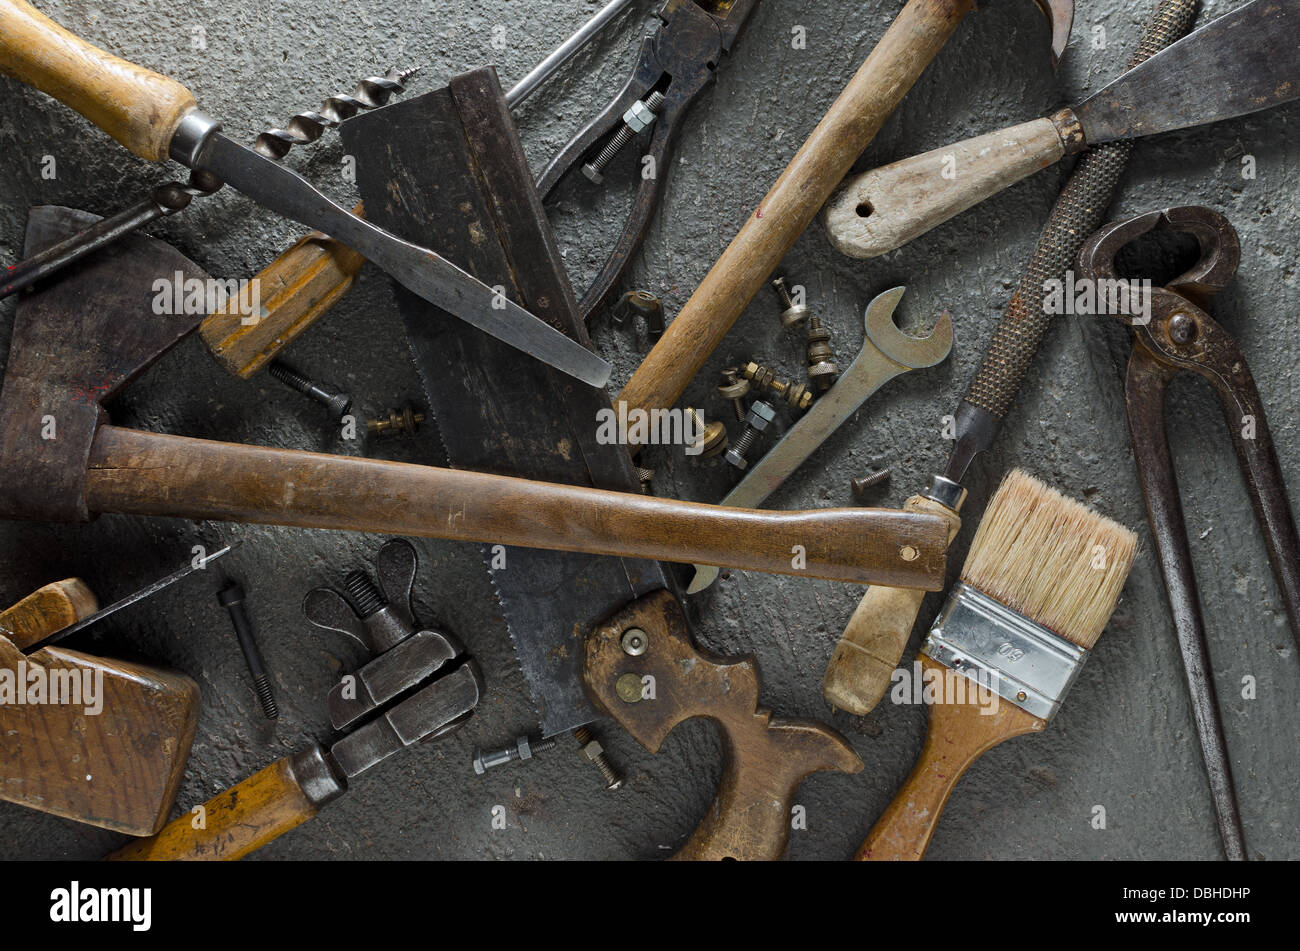 Gritty hand tools and other bits of grungy hardware Stock Photo